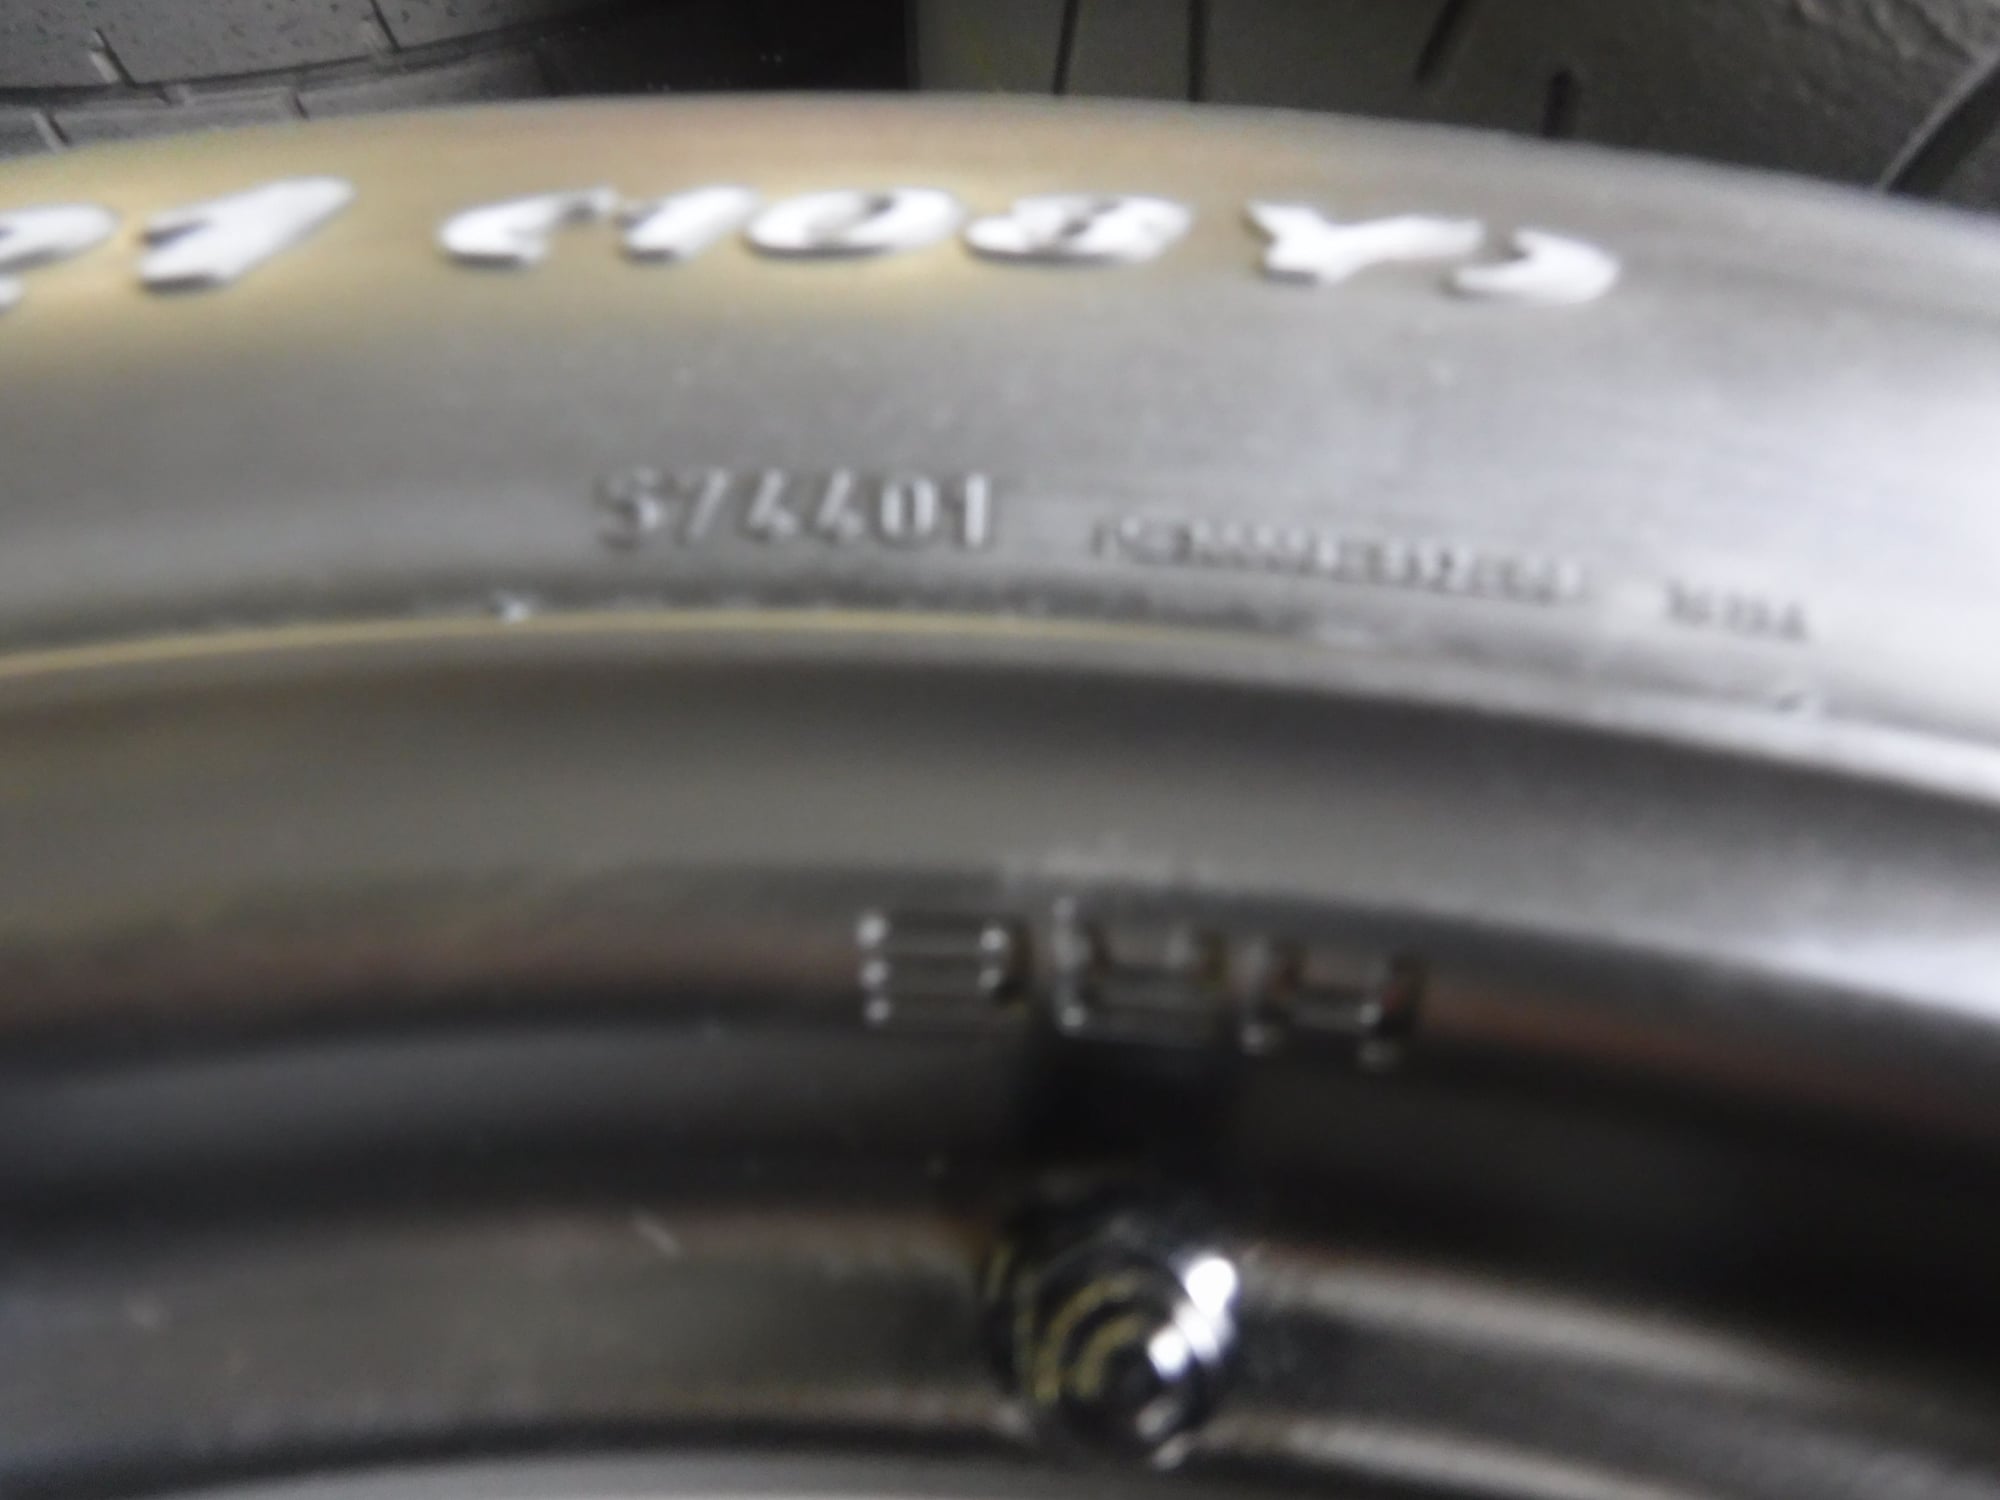 Wheels and Tires/Axles - HRE 101LW  fitment 20"/21" for GT3RS. 20x9.5 and 21x12.5; 265/35/20 and 325/30/21 - Used - Paducah, KY 42003, United States